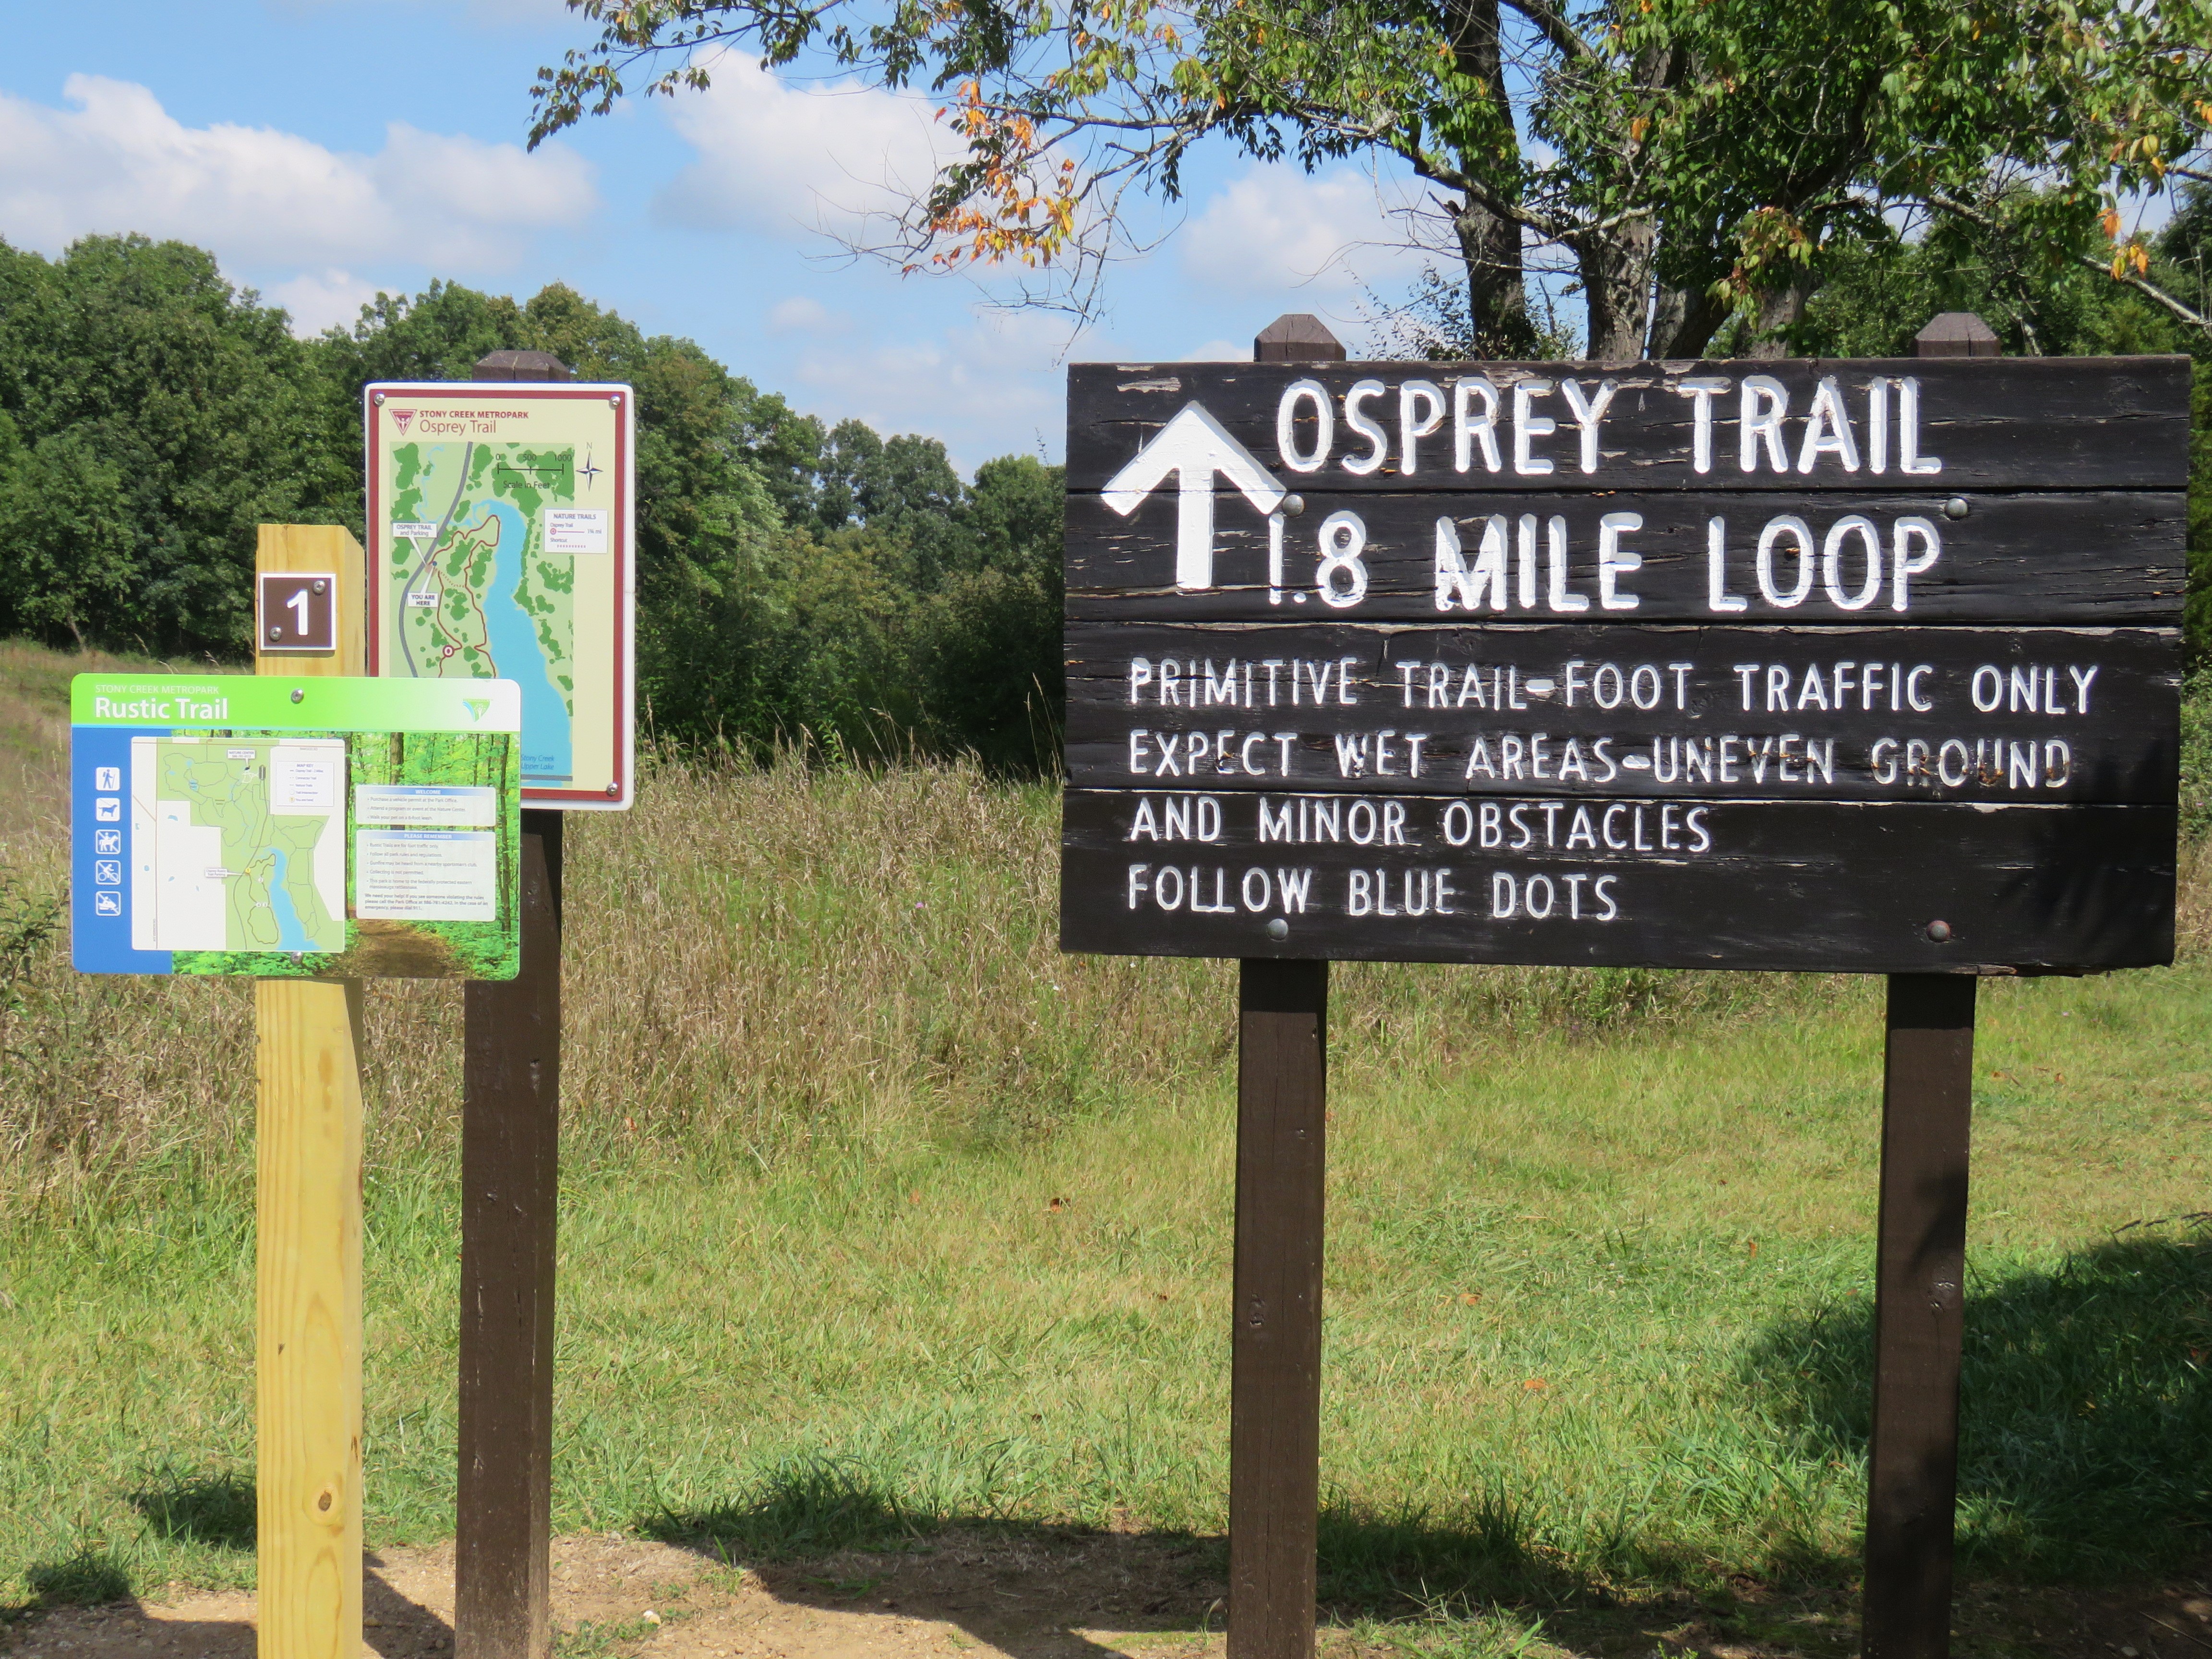 A photograph of three interpretive signs and their wooden posts in Stony Creek Metropark. Two smaller signs to the left show maps. A large dark brown wooden sign on the right shows an arrow pointing up. The text reads: Osprey Trail 1.8. Mile Loop. Underneath in a smaller font, it reads: Primitive Trail-Foot Traffic Only Expect Wet Areas-Uneven Ground and Minor Obstacles Follow Blue Dots